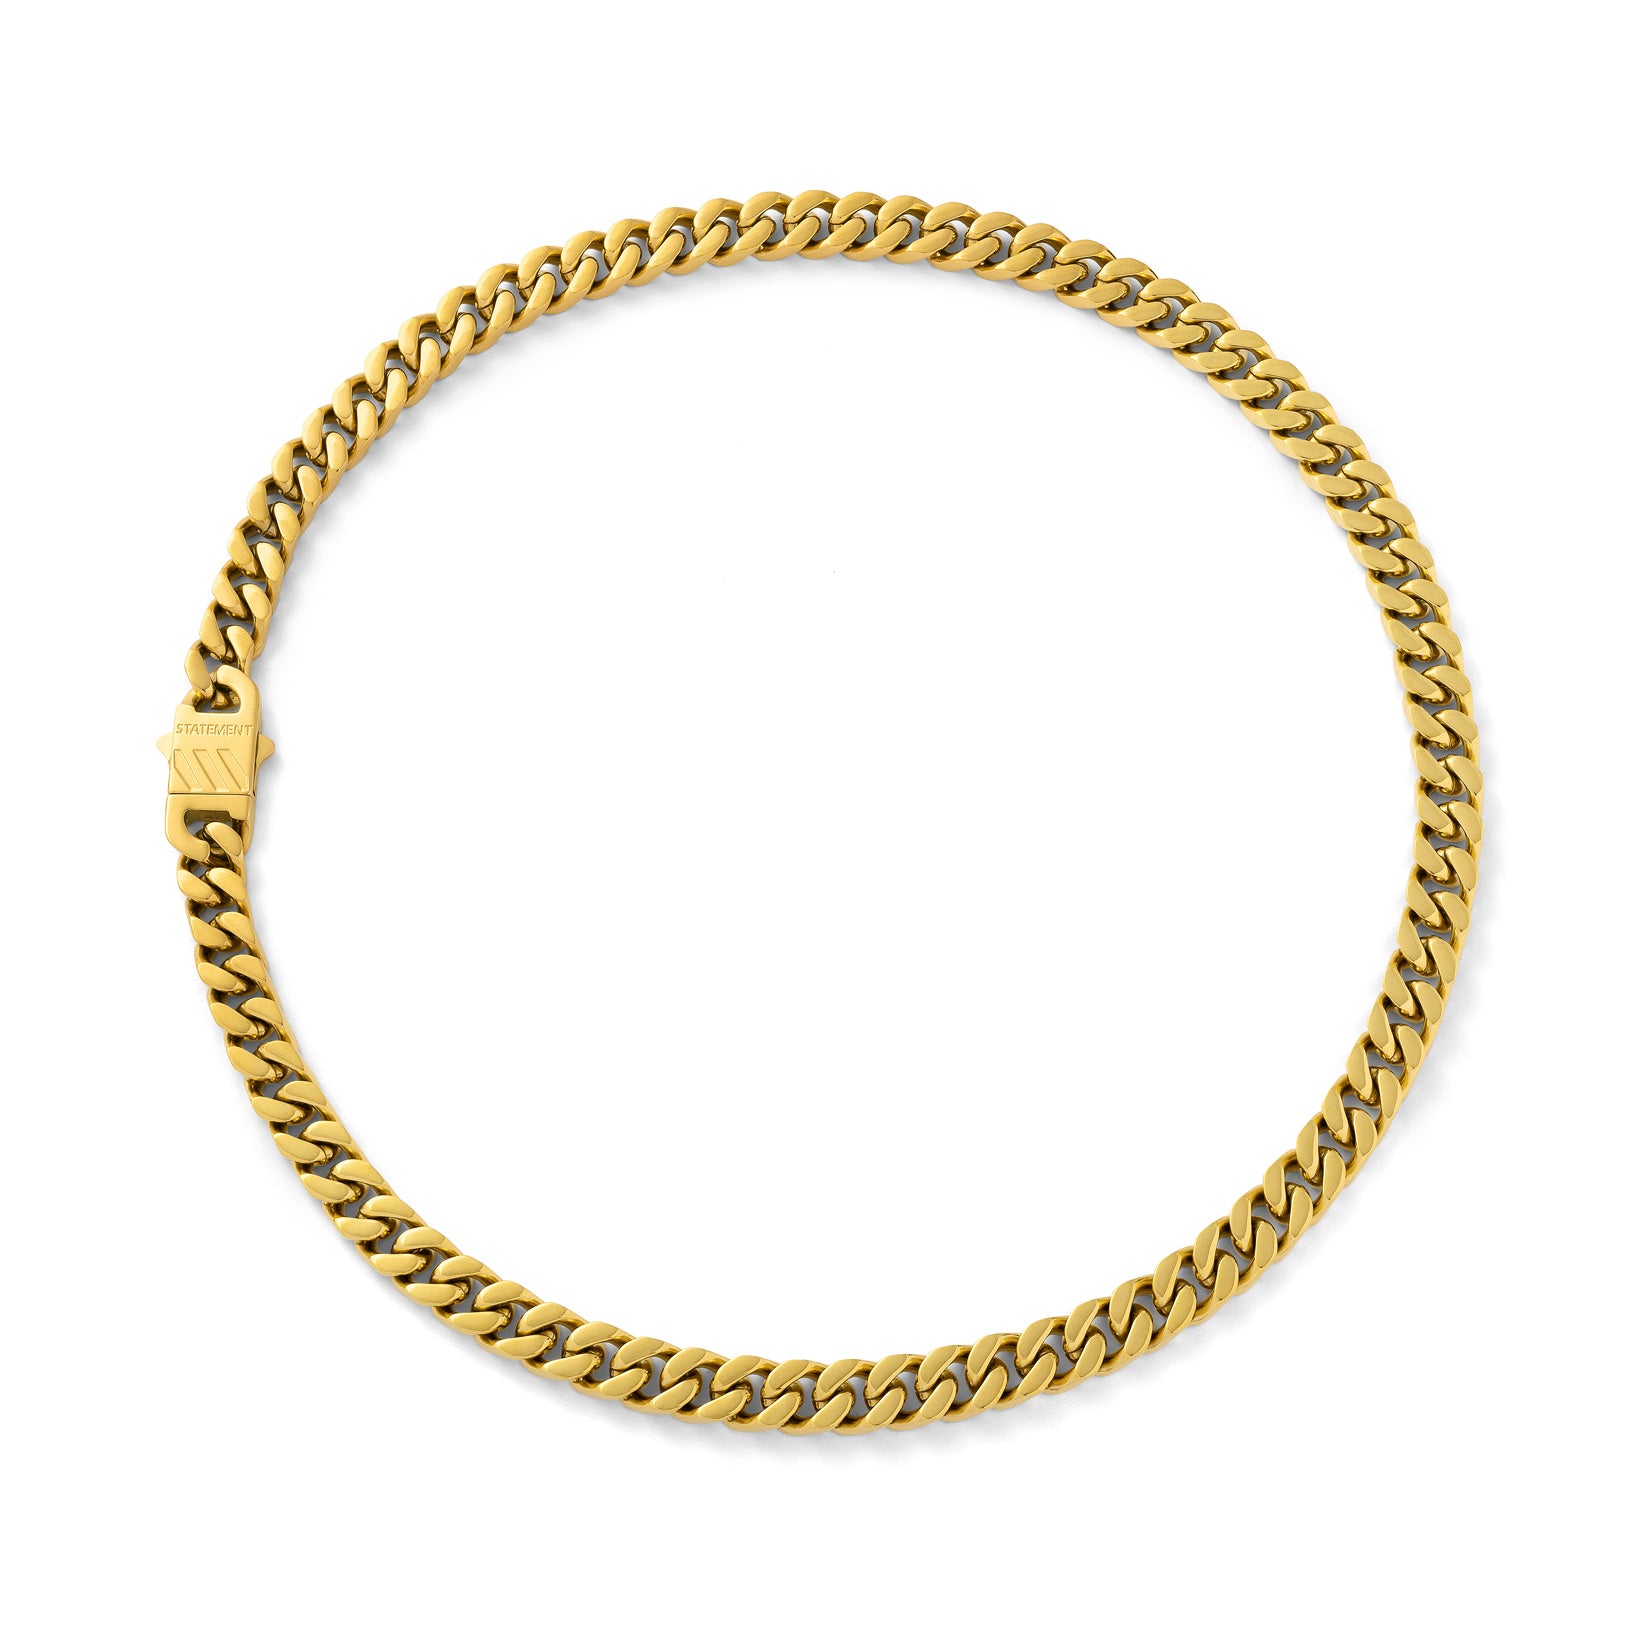 Gold 9mm cuban chain on white background